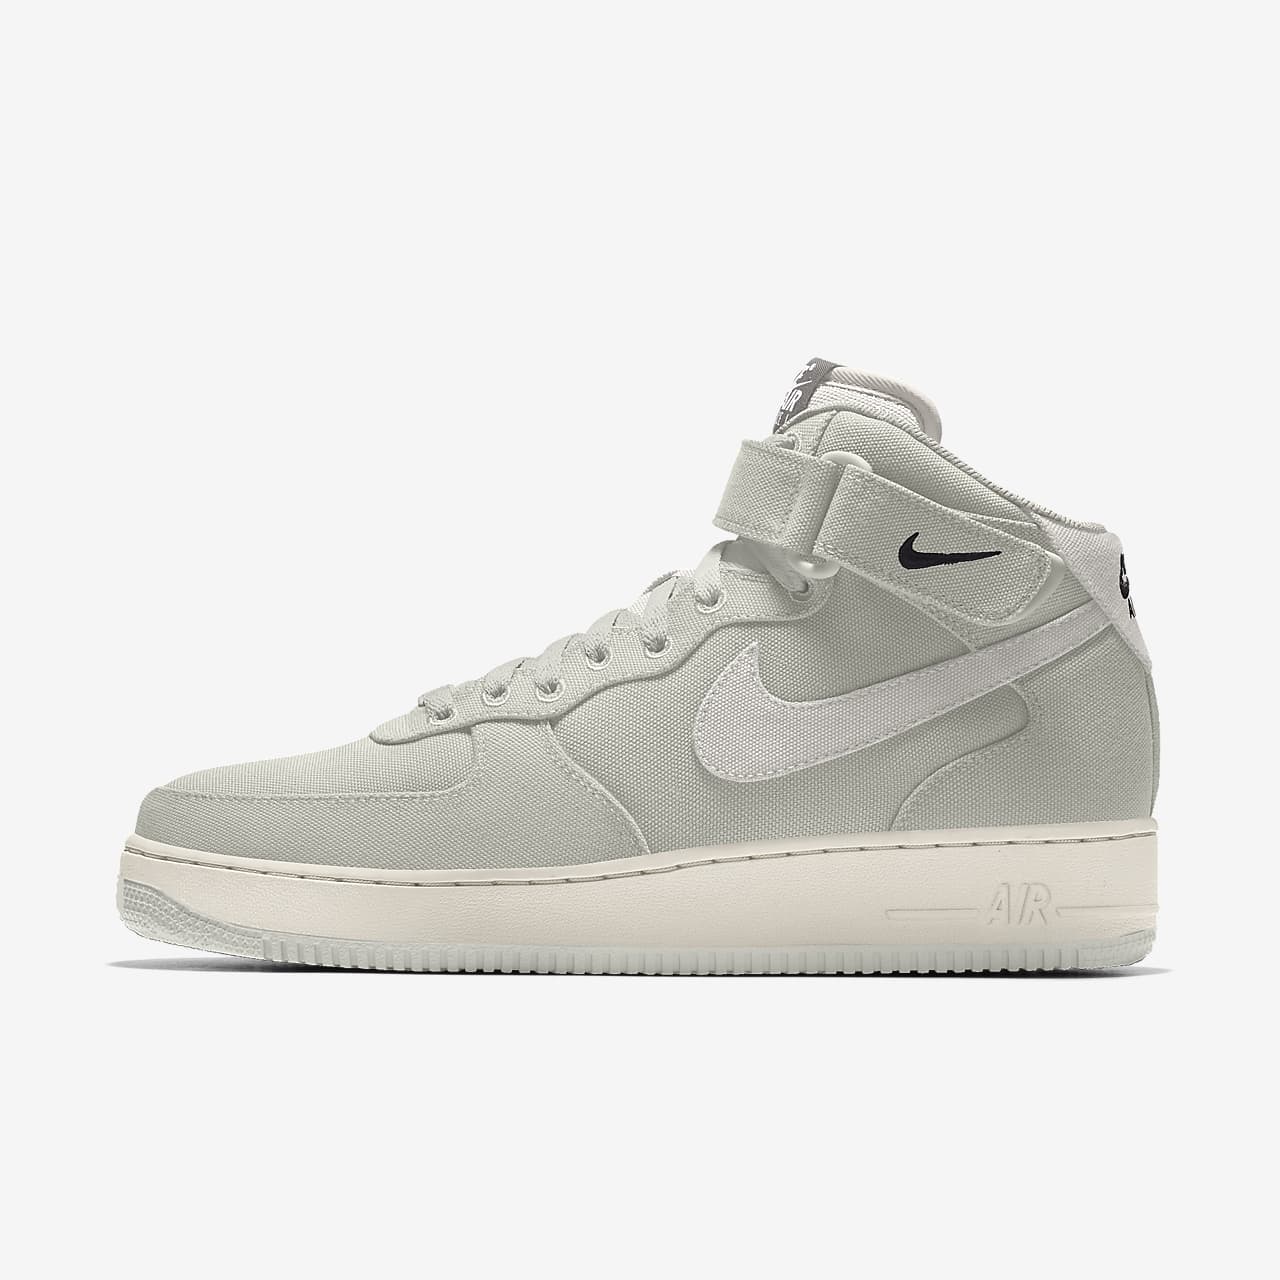 Chaussure personnalisable Nike Air Force 1 Mid By You pour femme